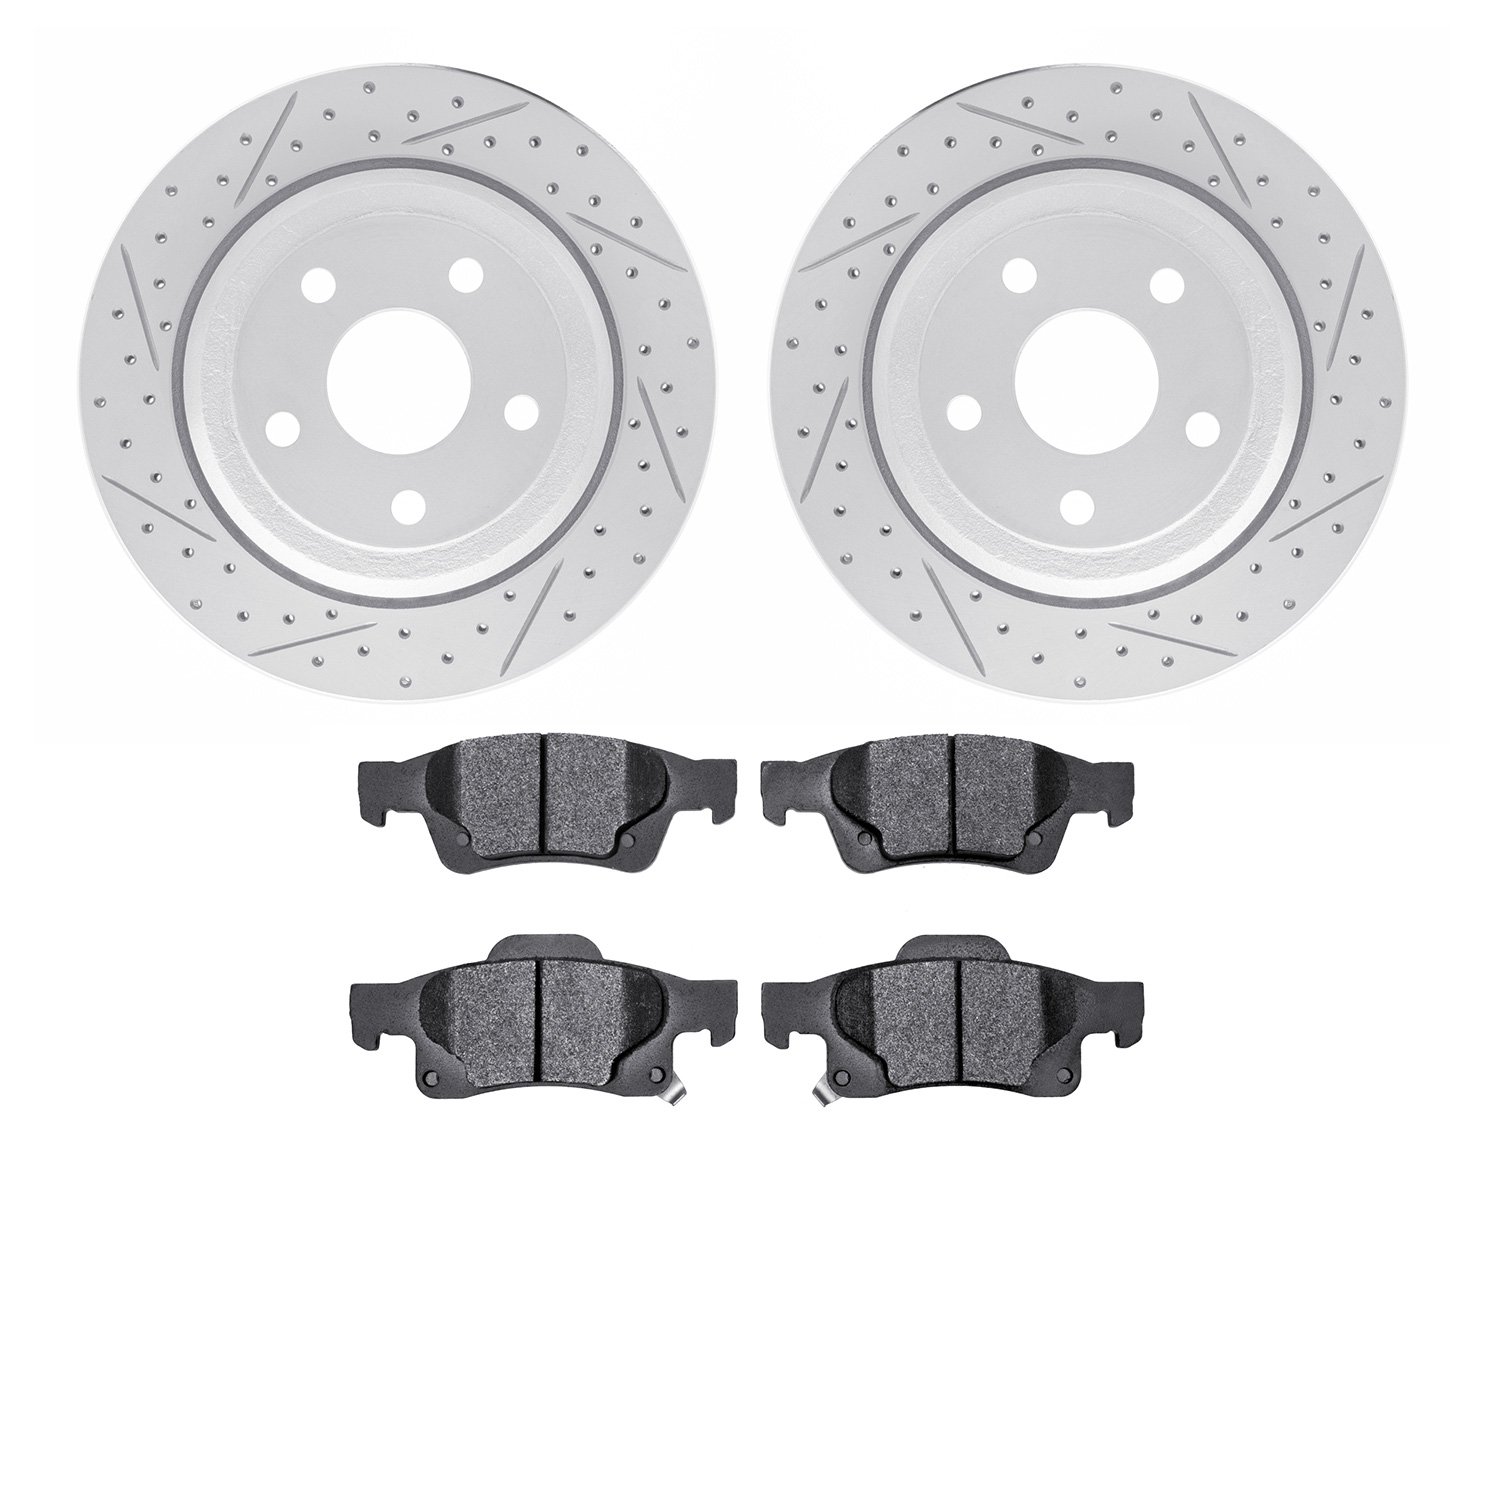 2202-42003 Geoperformance Drilled/Slotted Rotors w/Heavy-Duty Pads Kit, Fits Select Mopar, Position: Rear